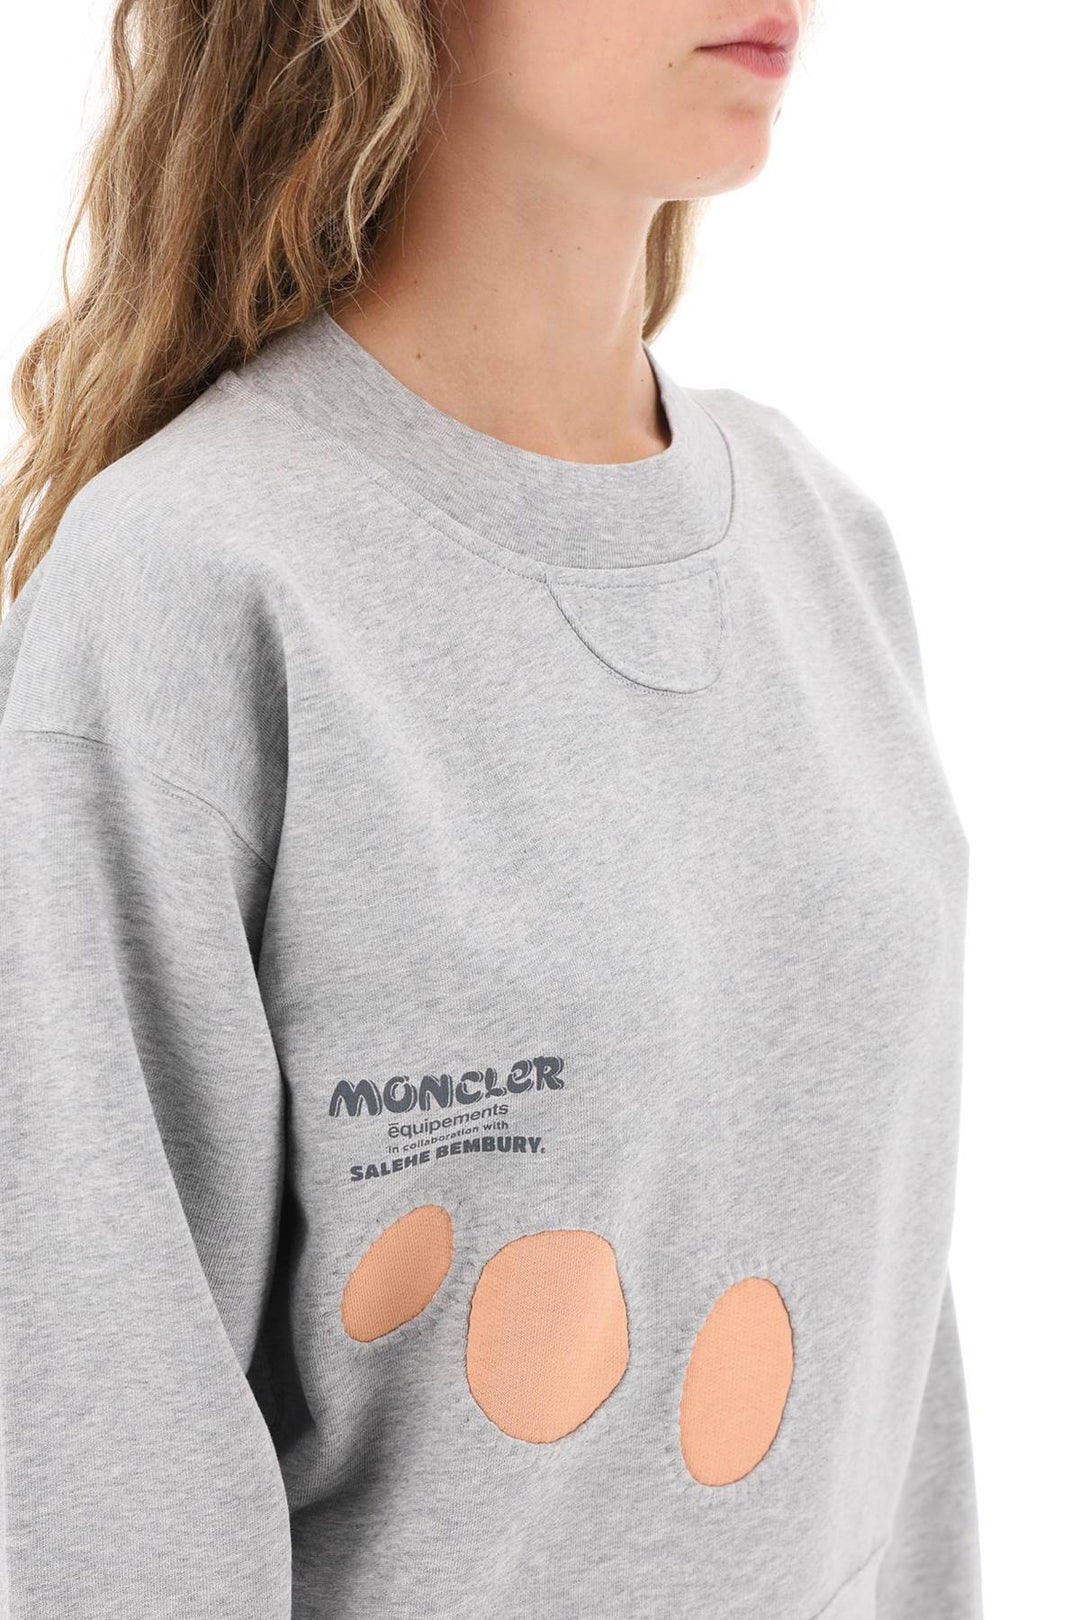 Moncler x salehe bembury sweater with cut-outs-3